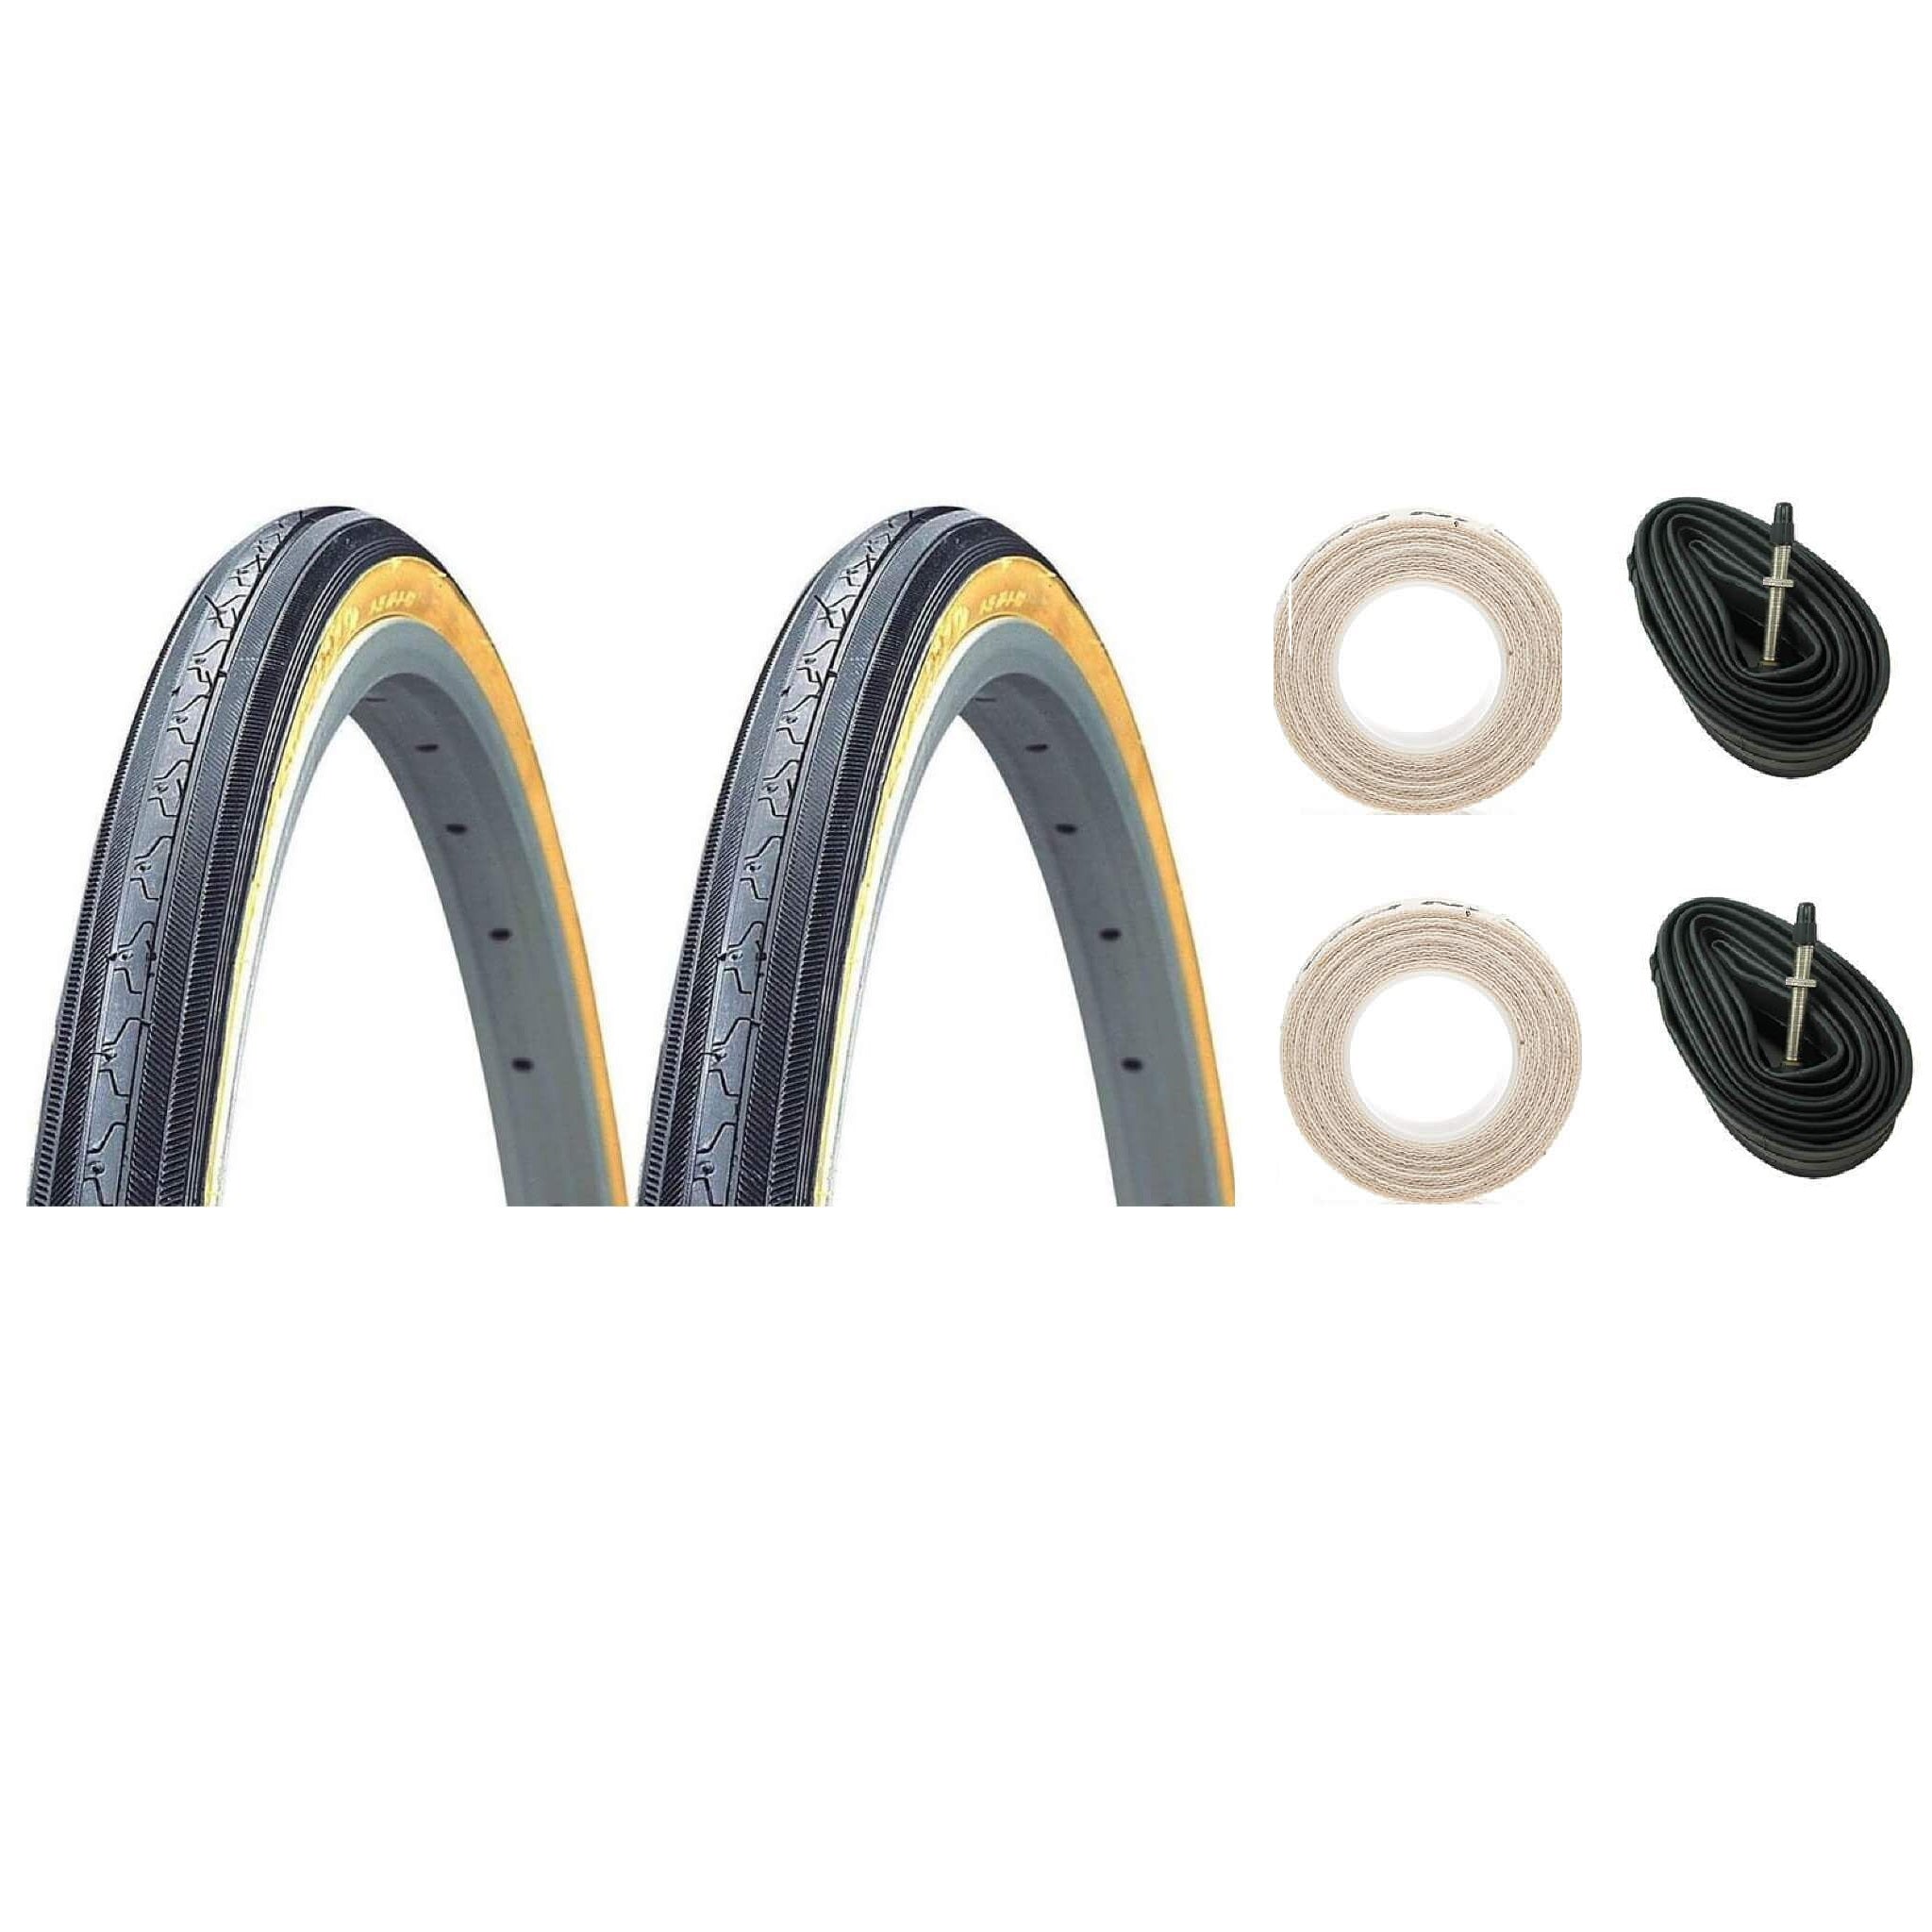 K35 27x1-1/4 gum-wall tire with Presta tube and cloth rim strips